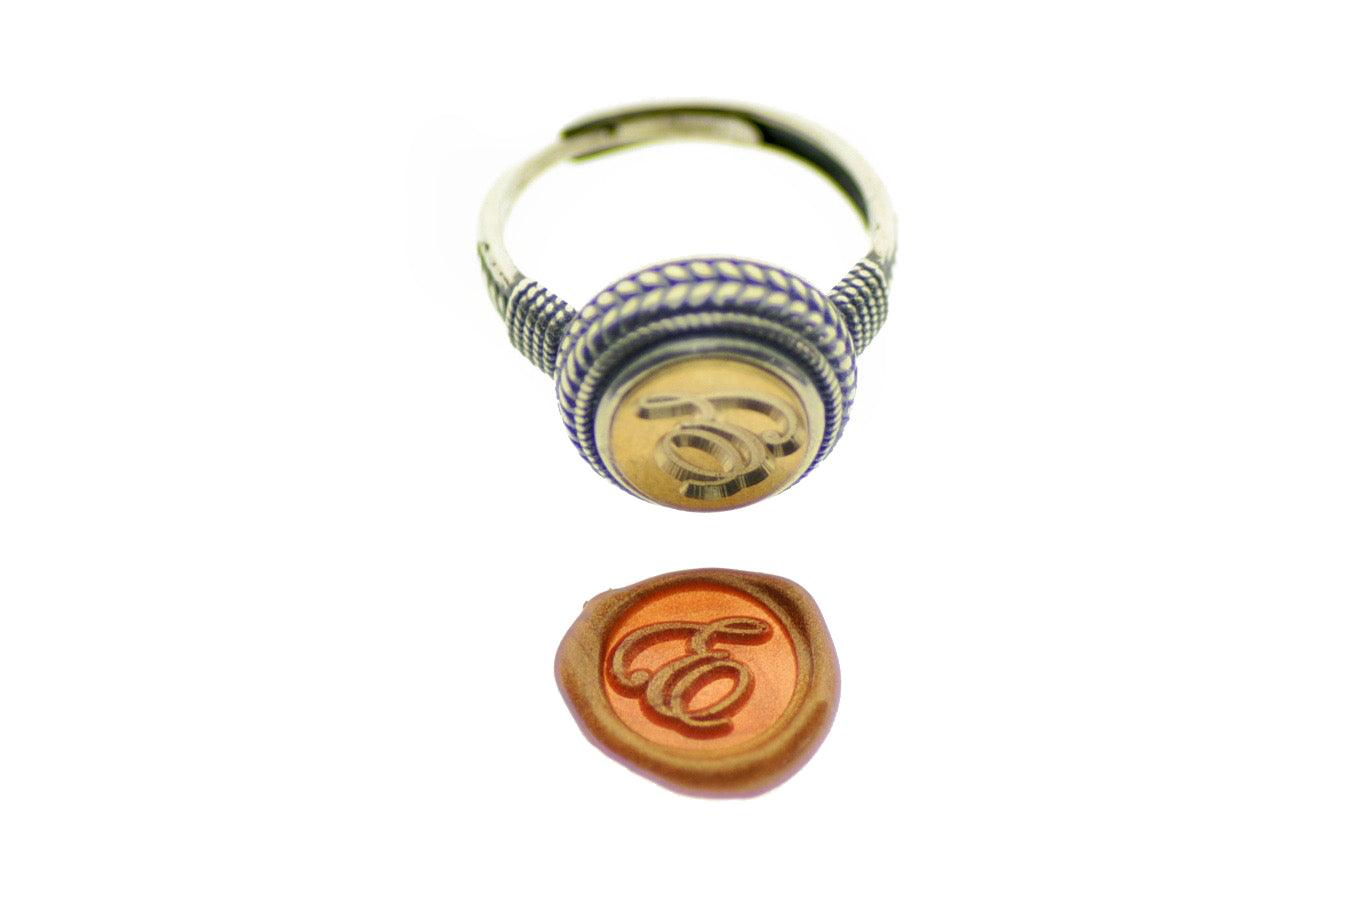 Script Initial Signet Ring - Backtozero B20 - 1 initial, 10mm, 10mm ring, 10w, 1initial, accessory, Copper Gold, Custom, custom ring, her, Initial, initial ring, jewelry, Laurel Wreath, Personalized, ring, seal, seal ring, signet ring, size 6, size 7, size 8, wax seal, wax seal ring, wax seal stamp, wreath